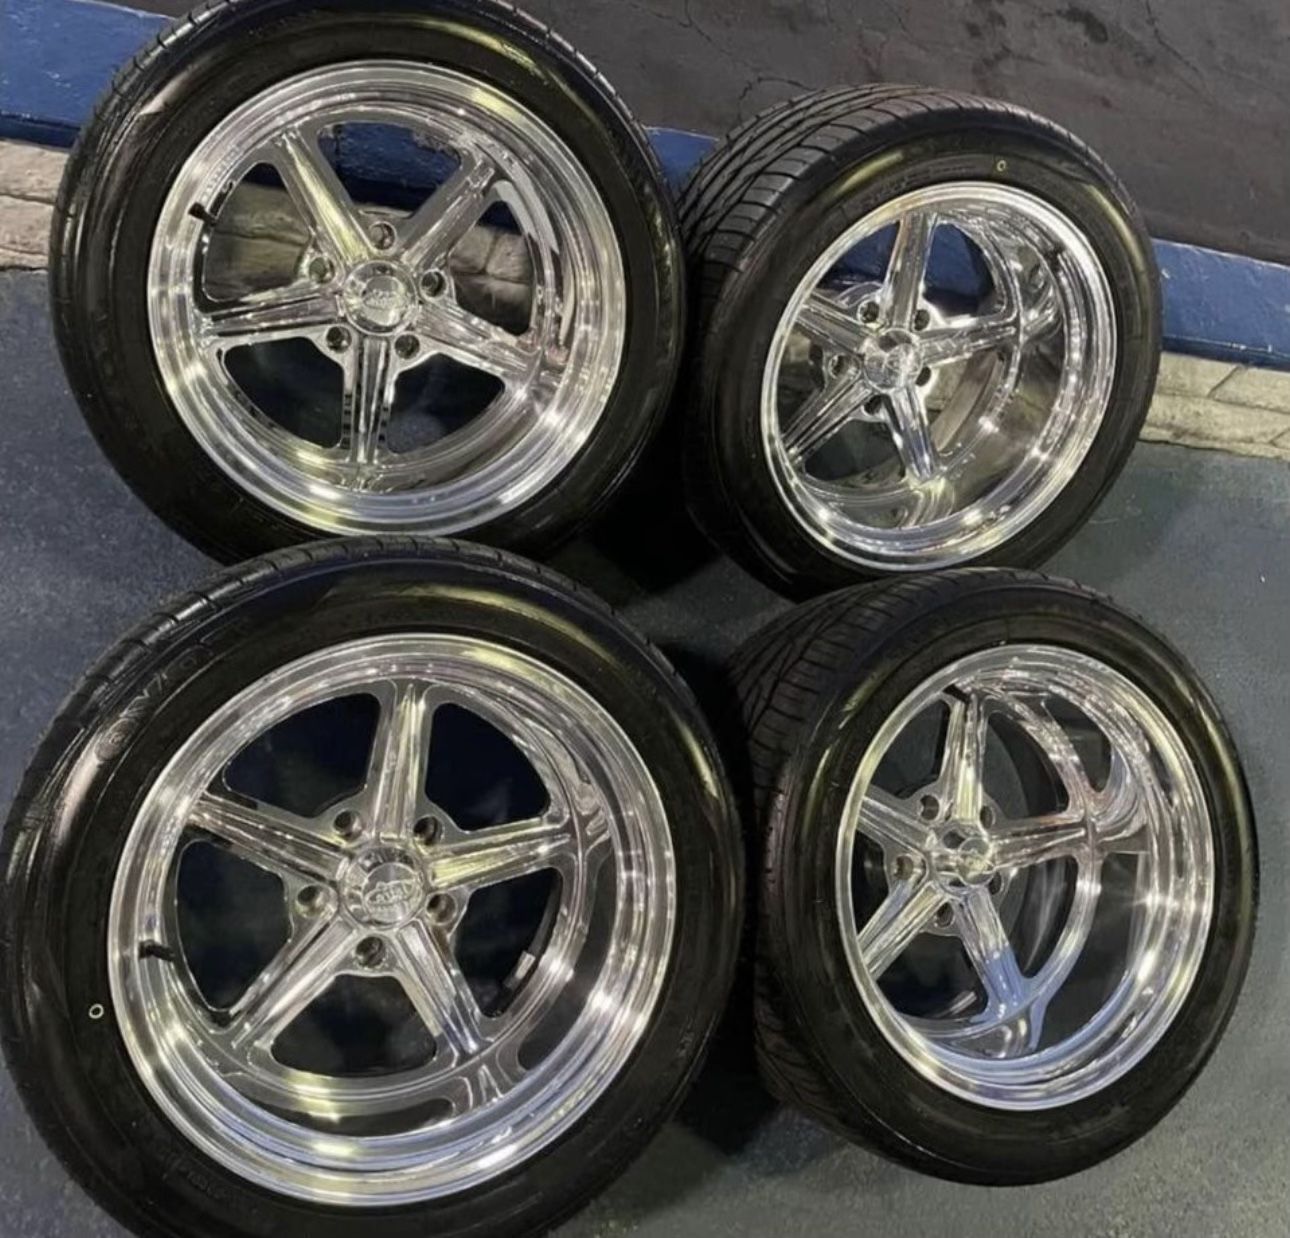 Intro Hauler 17x11 Polished Wheels With Toyo Extensa 315/35/17 Tires For Obs or C-10 Chevy 🔥🔥🔥 